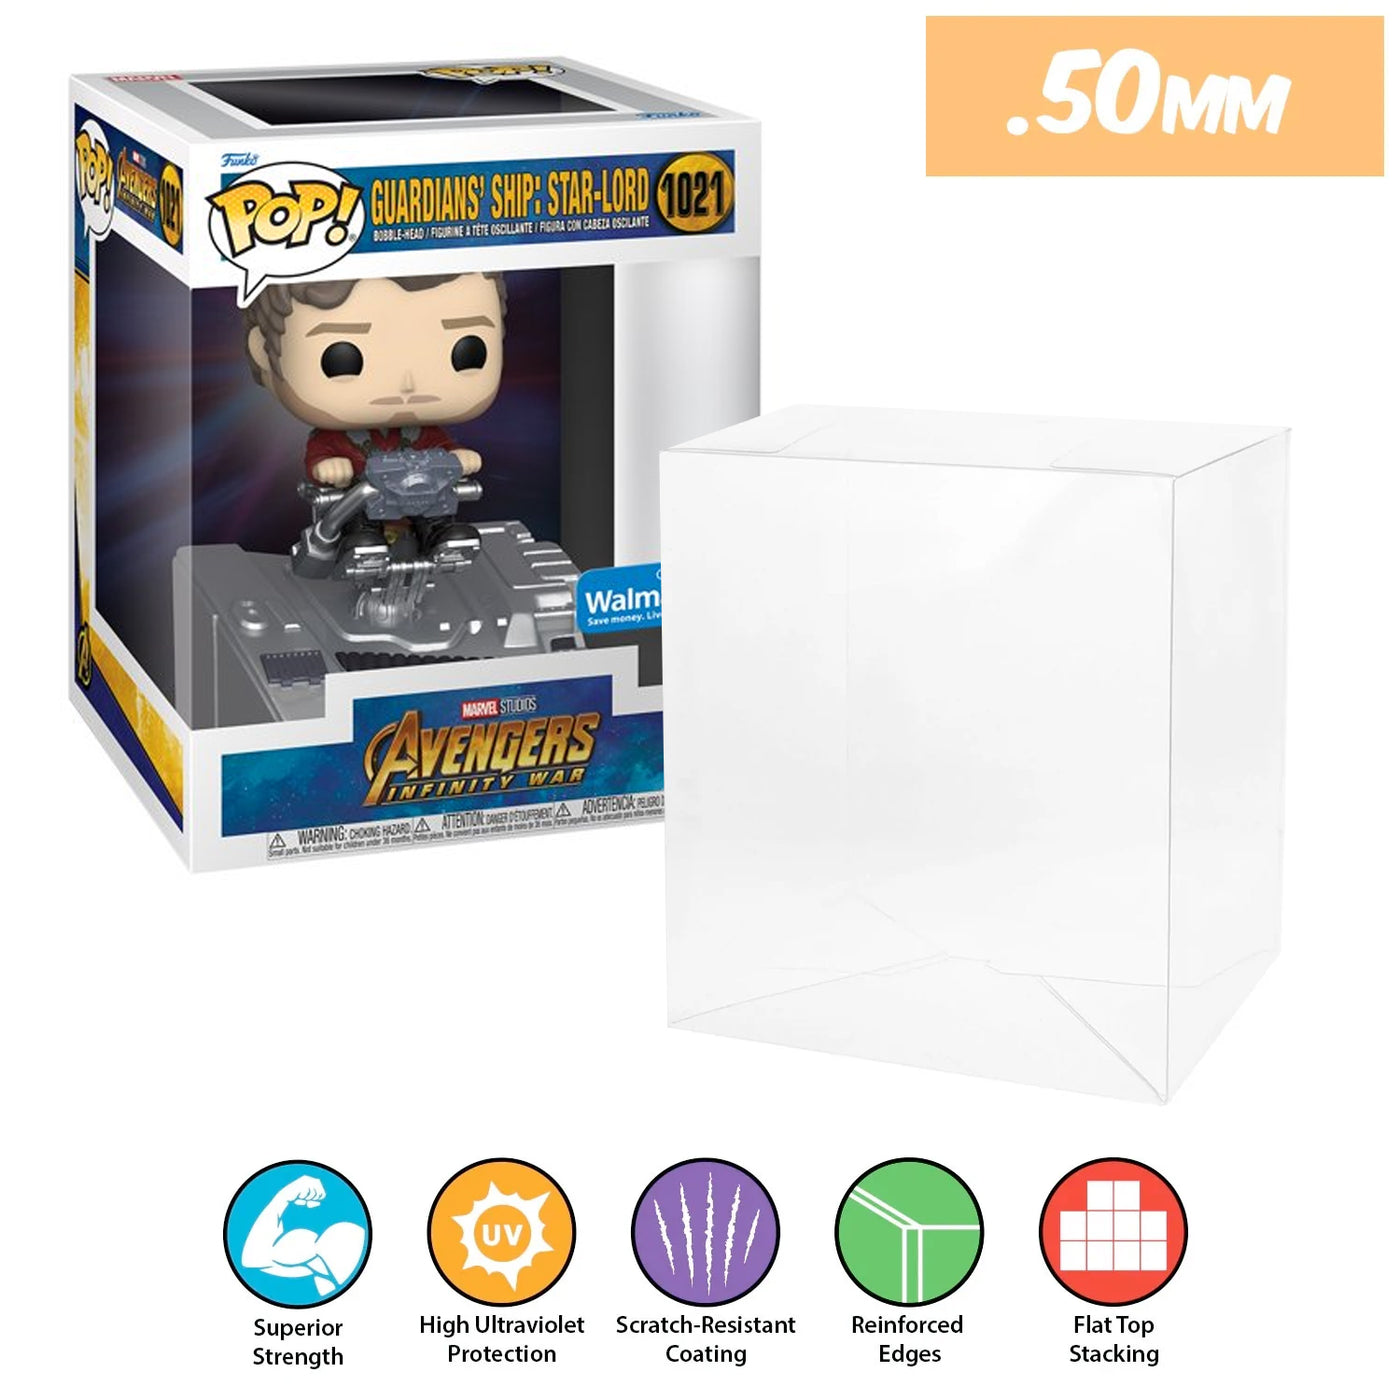 marvel guardians ship starlord pop deluxe best funko pop protectors thick strong uv scratch flat top stack vinyl display geek plastic shield vaulted eco armor fits collect protect display case kollector protector